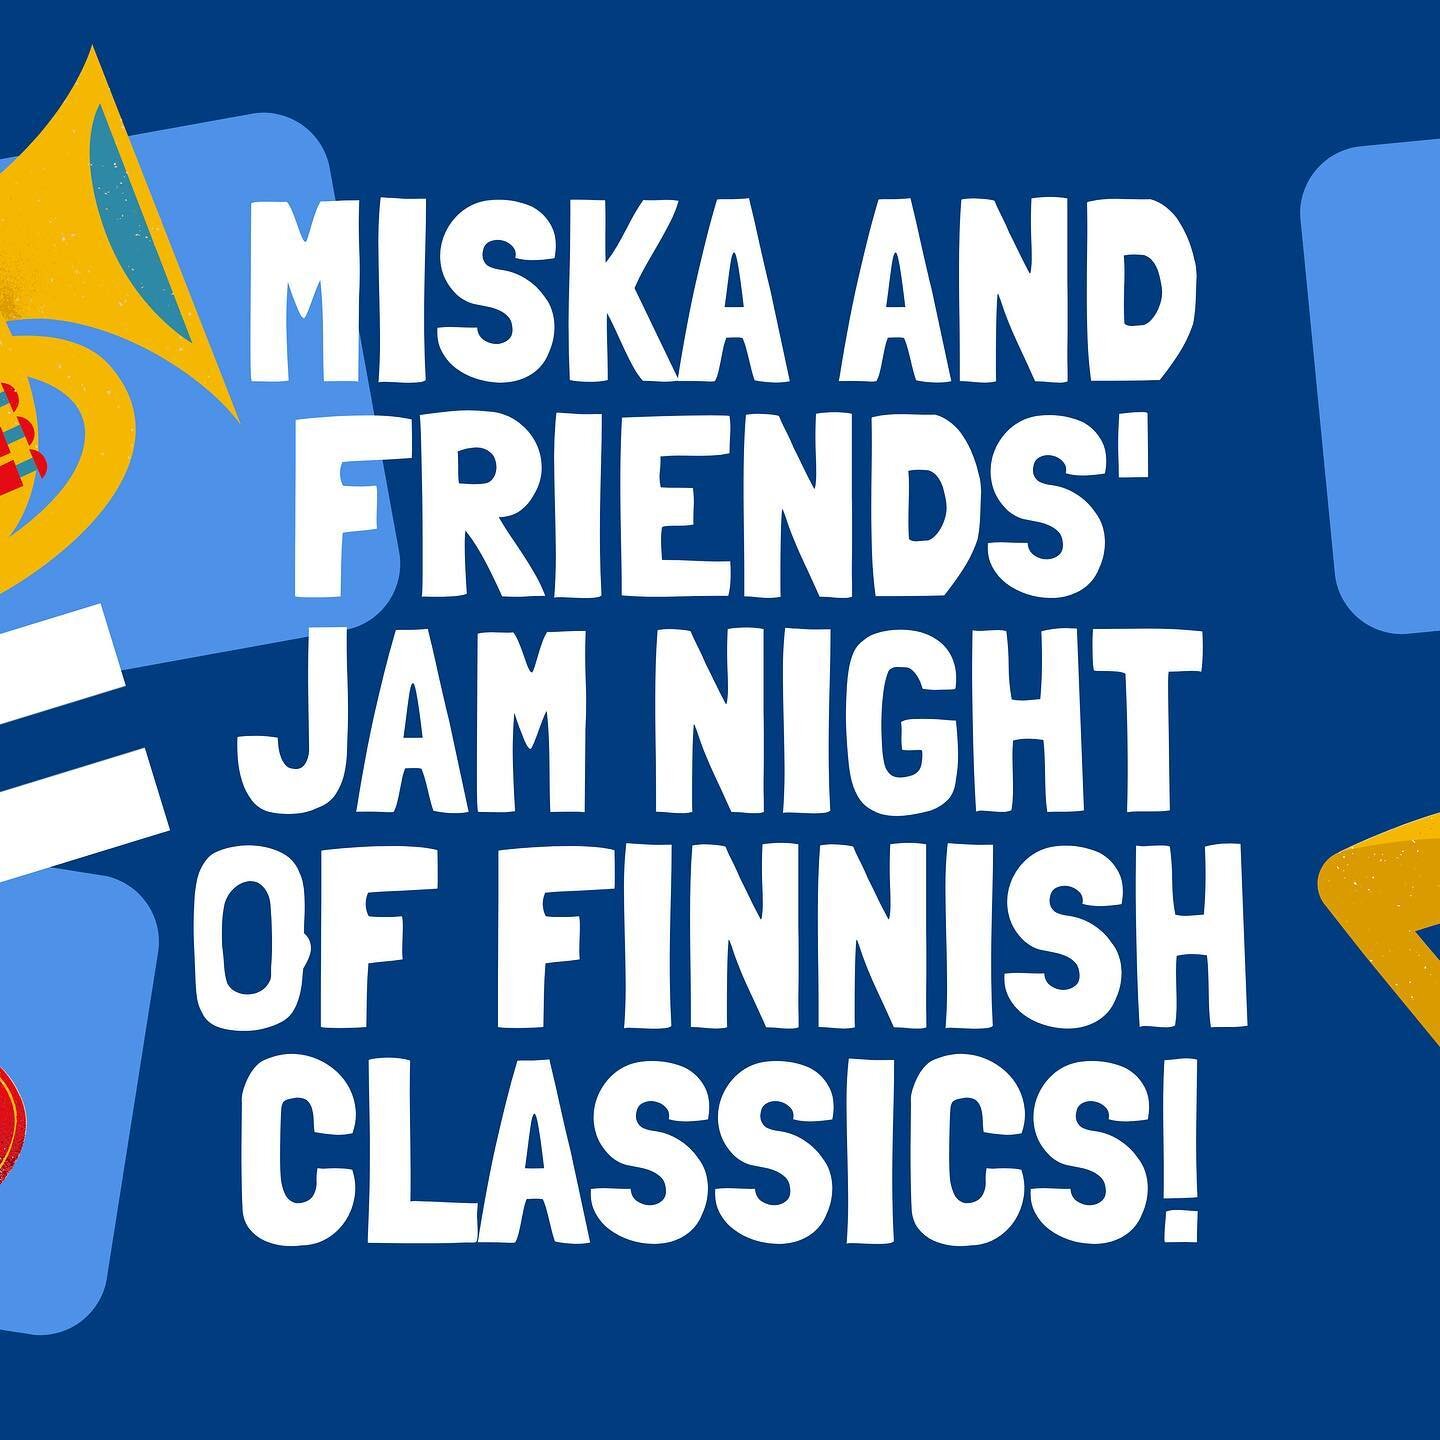 Join us for a concert and jam session with Miska &amp; Friends. We'll be playing some beloved Finnish classics!
7 PM on Saturday Nov 18th at LA Finnish Center. 
Tickets $15